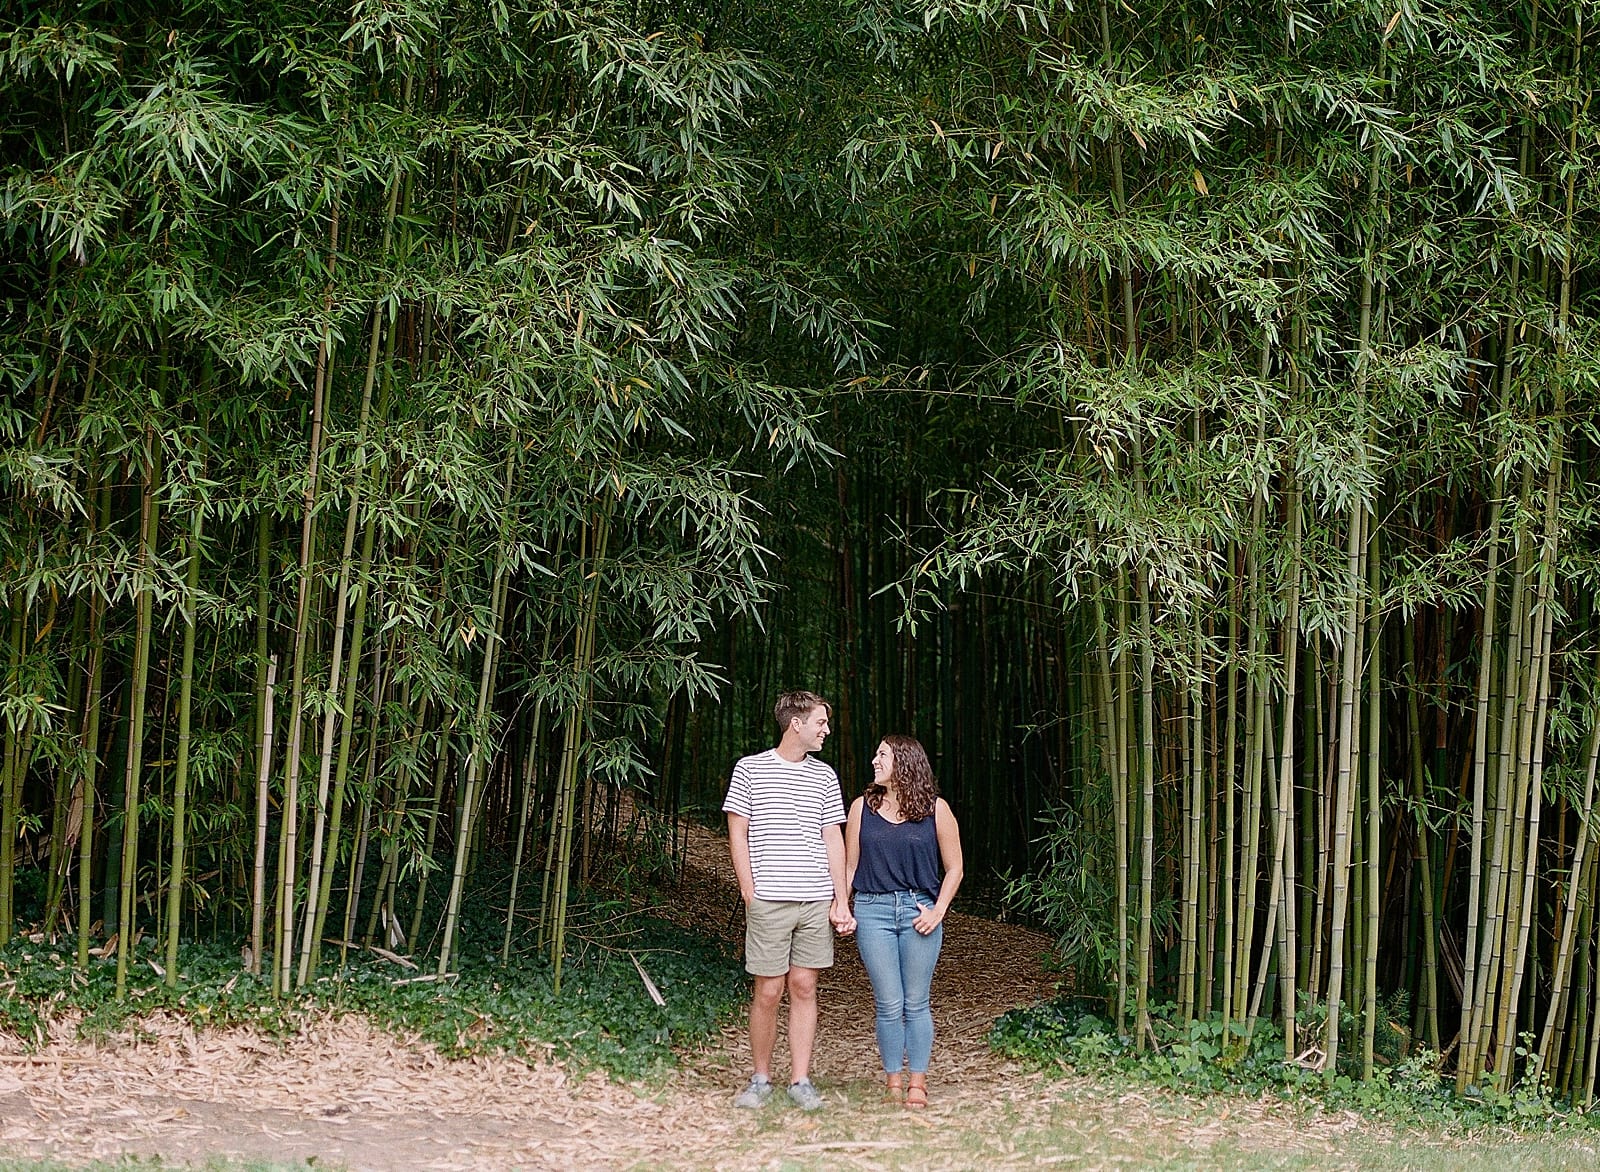 Romantic Biltmore Locations Couple Holding Hands at Bamboo Forest Photo